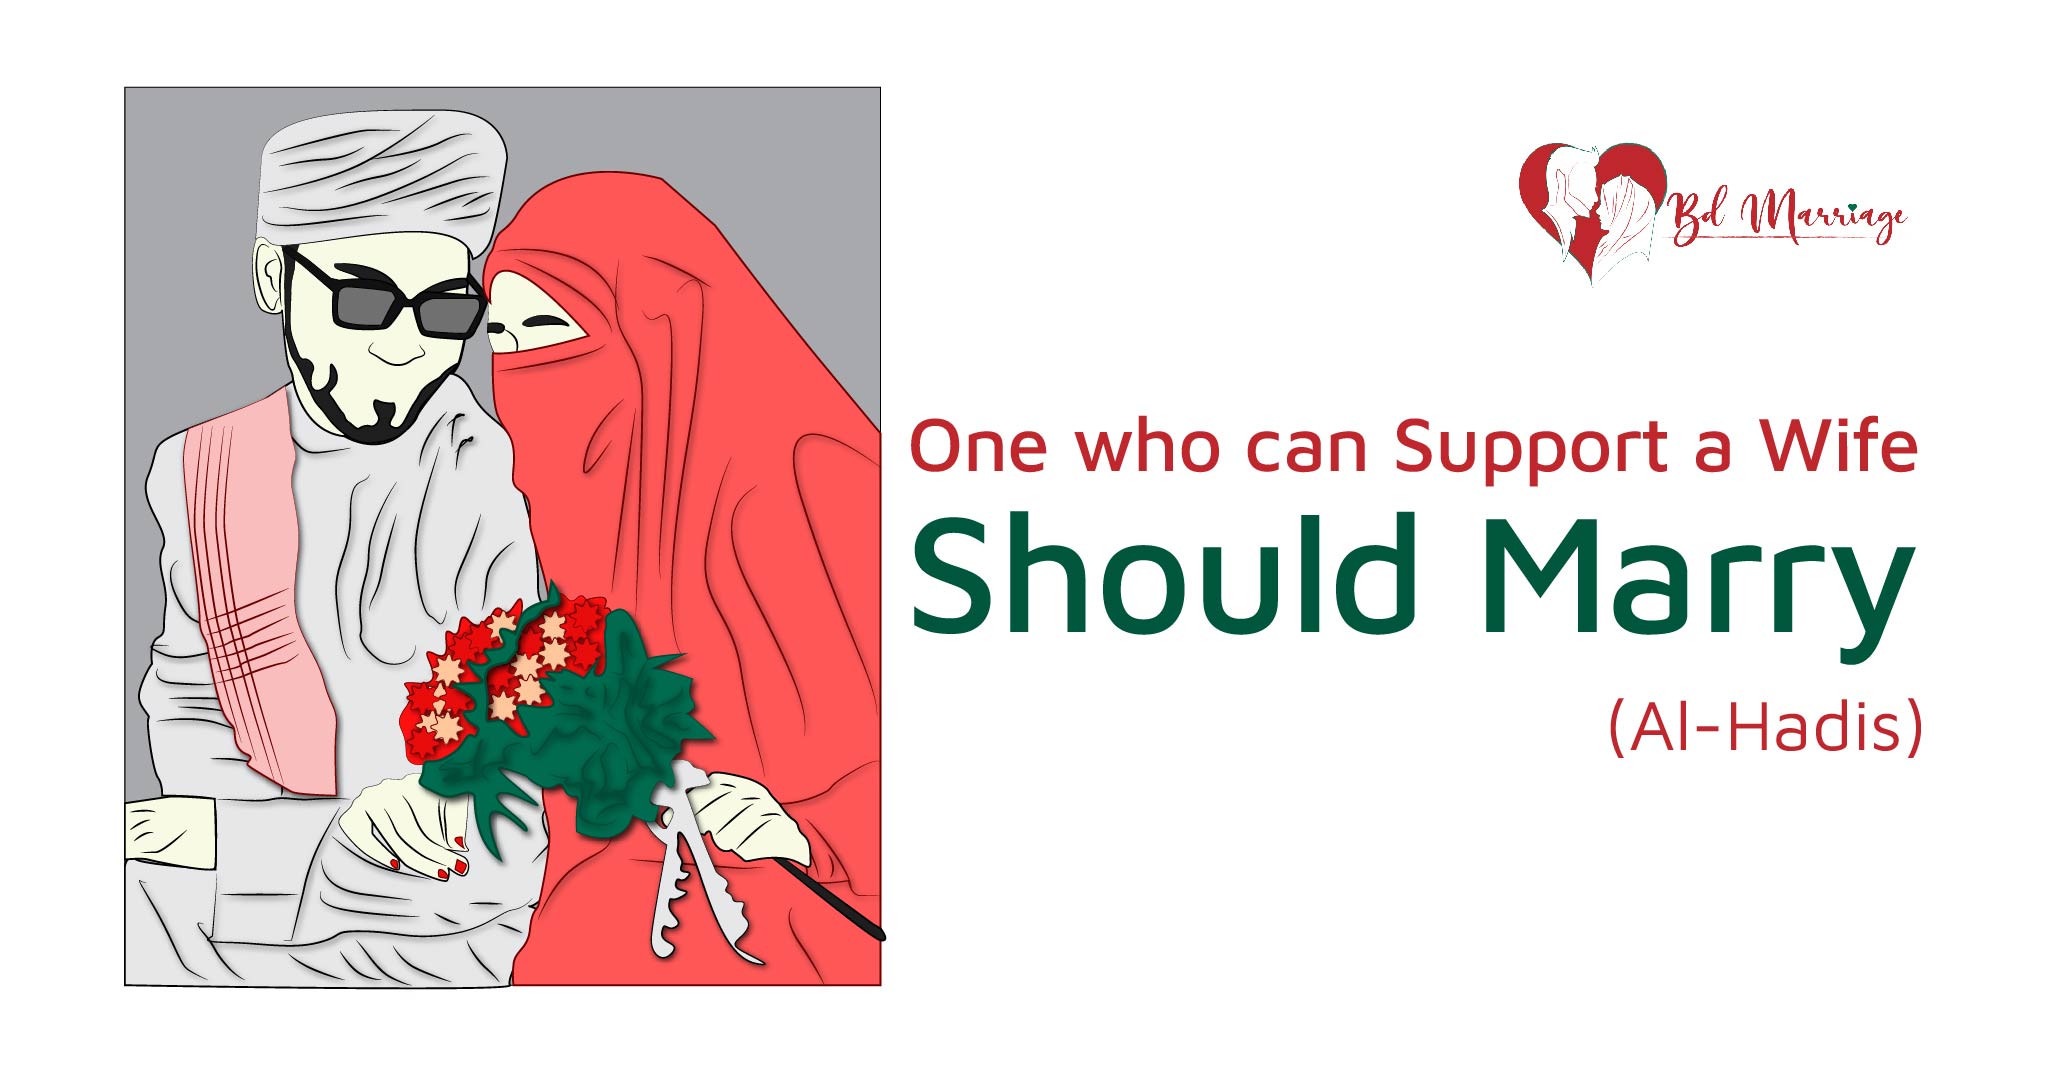 "One Who Can Support a Wife Should Marry"